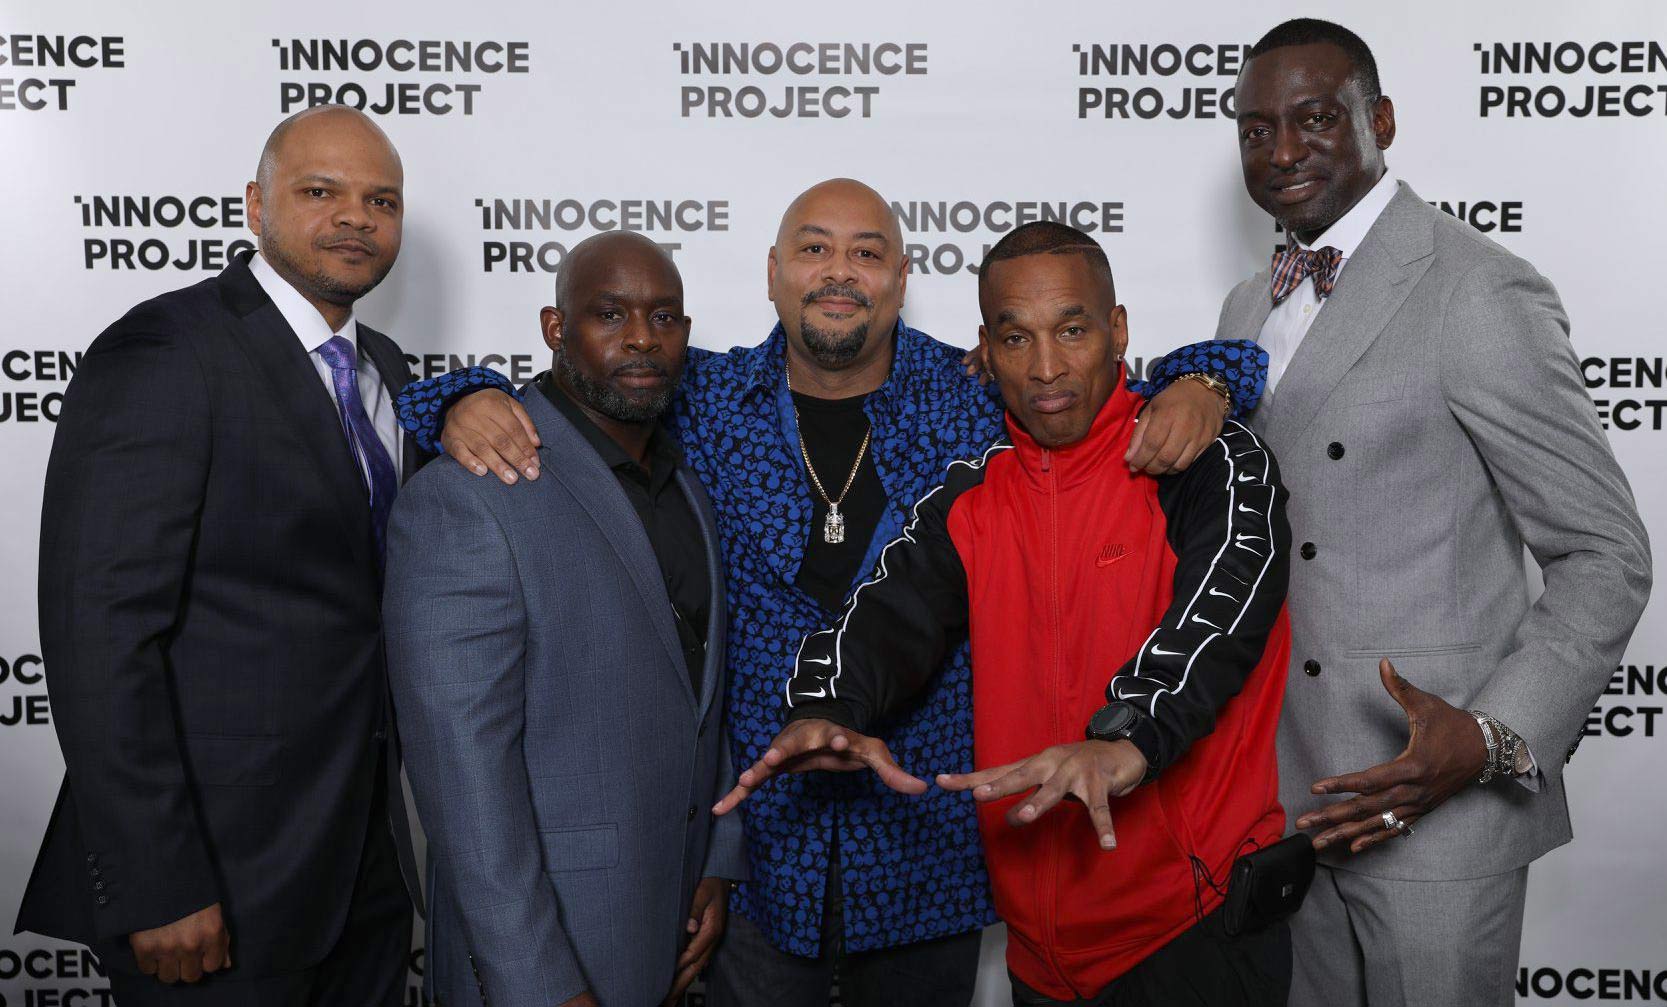 Kevin Richardson, Antron McCray, Raymond Santana, Korey Wise, and Yusef Salaam at the Innocence Project gala in May 2019. Photo by Matthew Adam Photography.